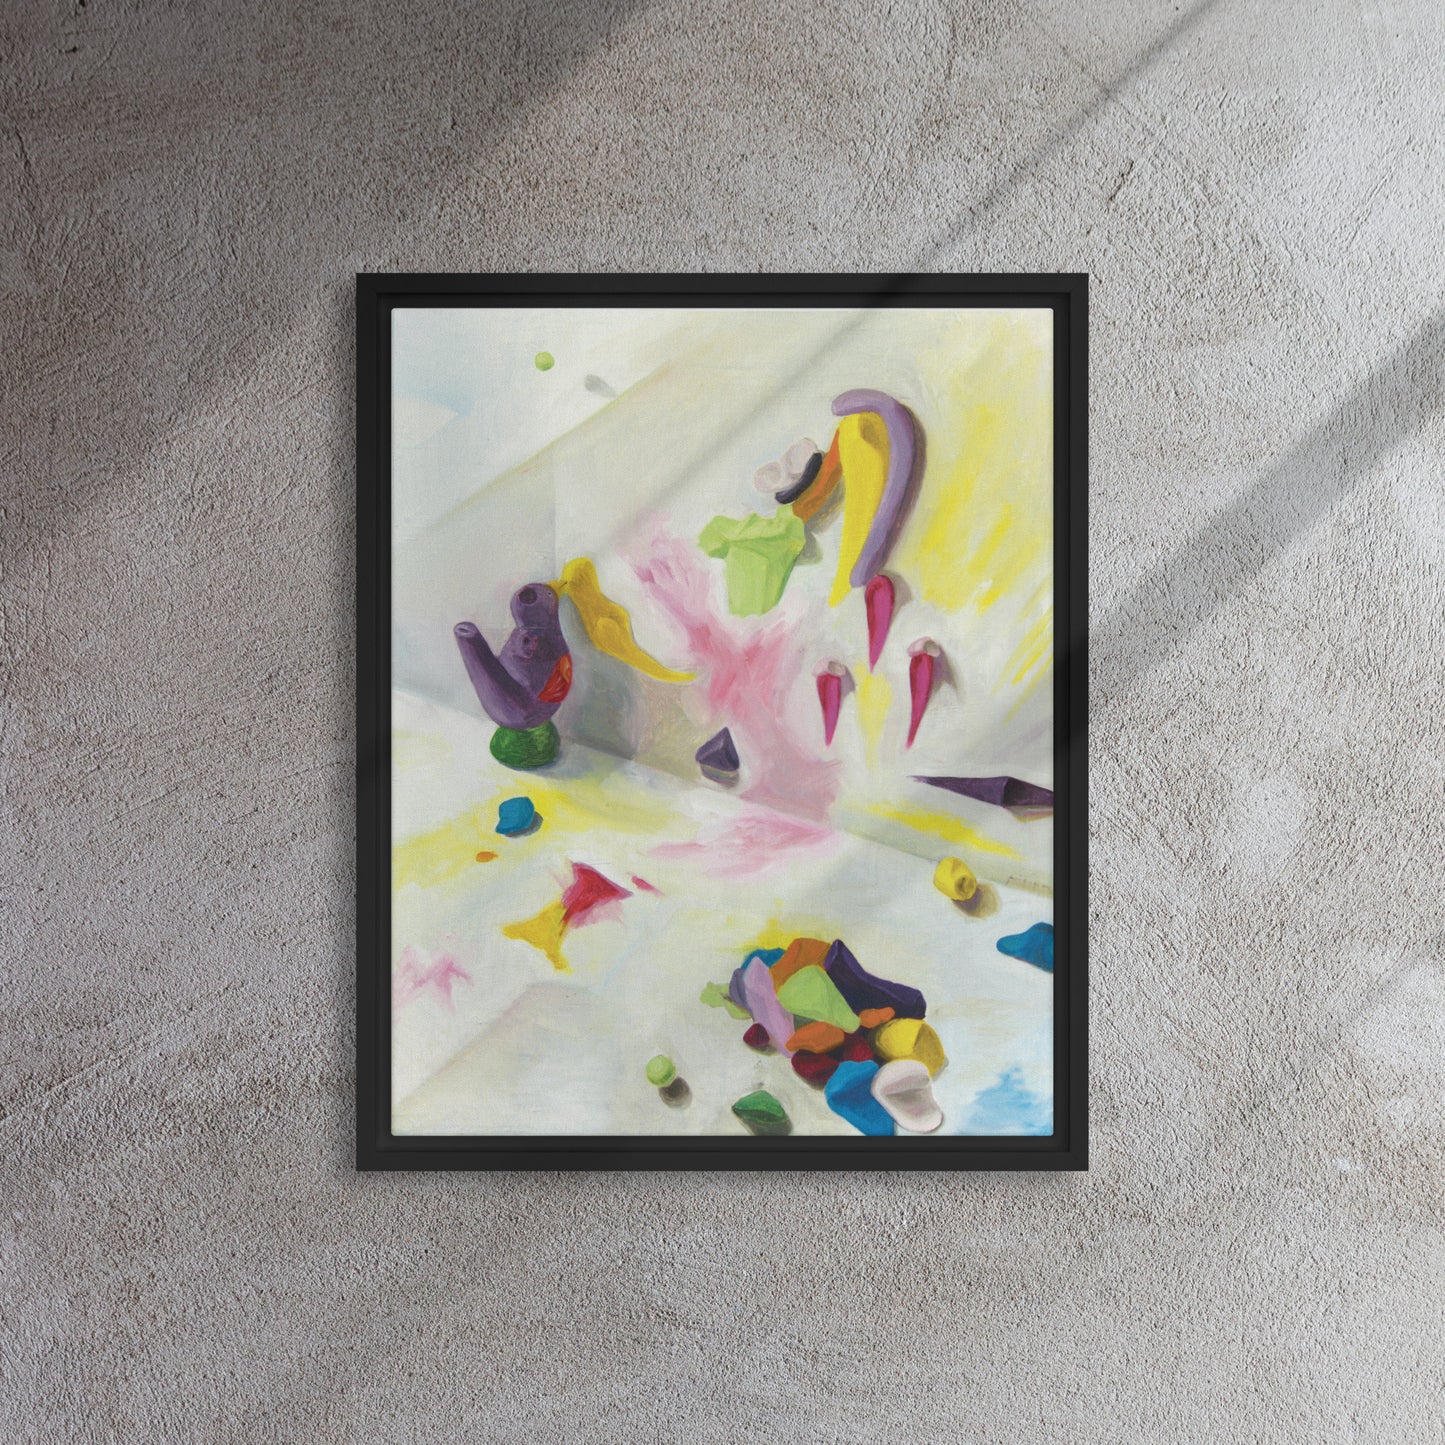 Piles of Laundry 3 -2015- Framed Canvas Print - Oil Painting Print